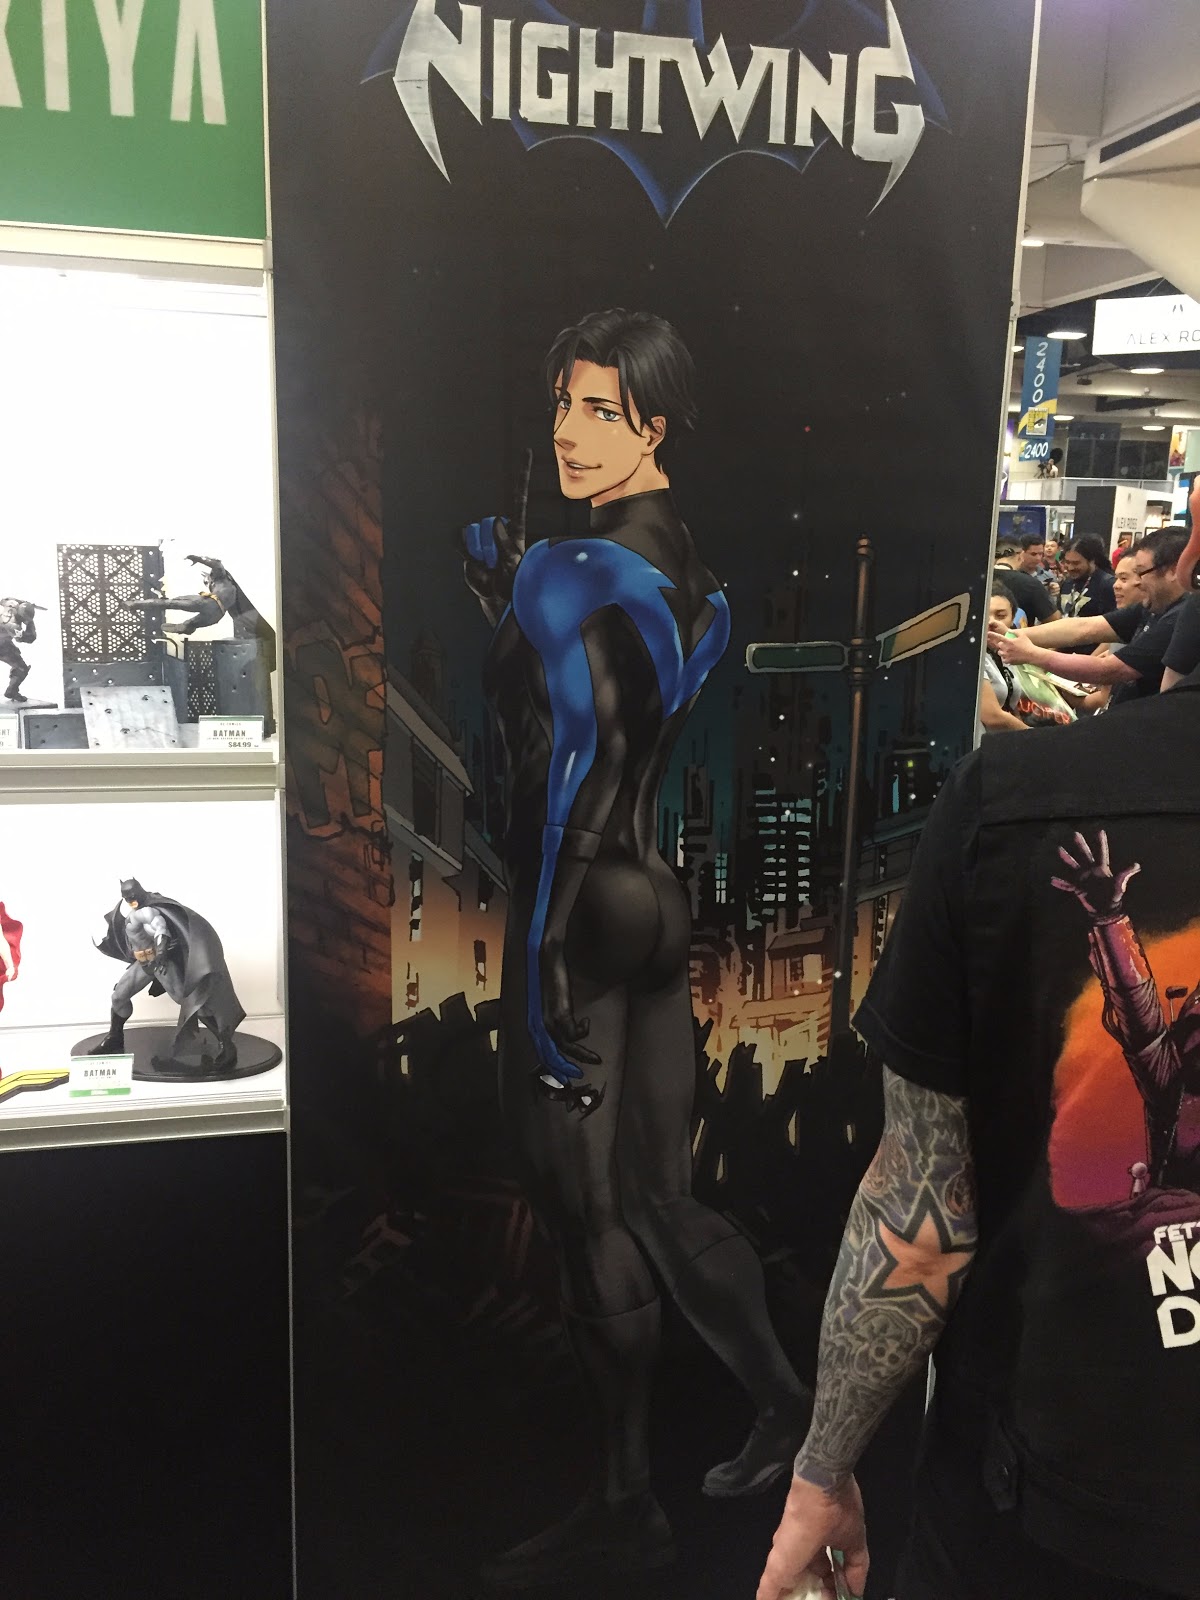 There’s Going To Be A Statue Dedicated To Nightwing’s Sweet, Tight Arse